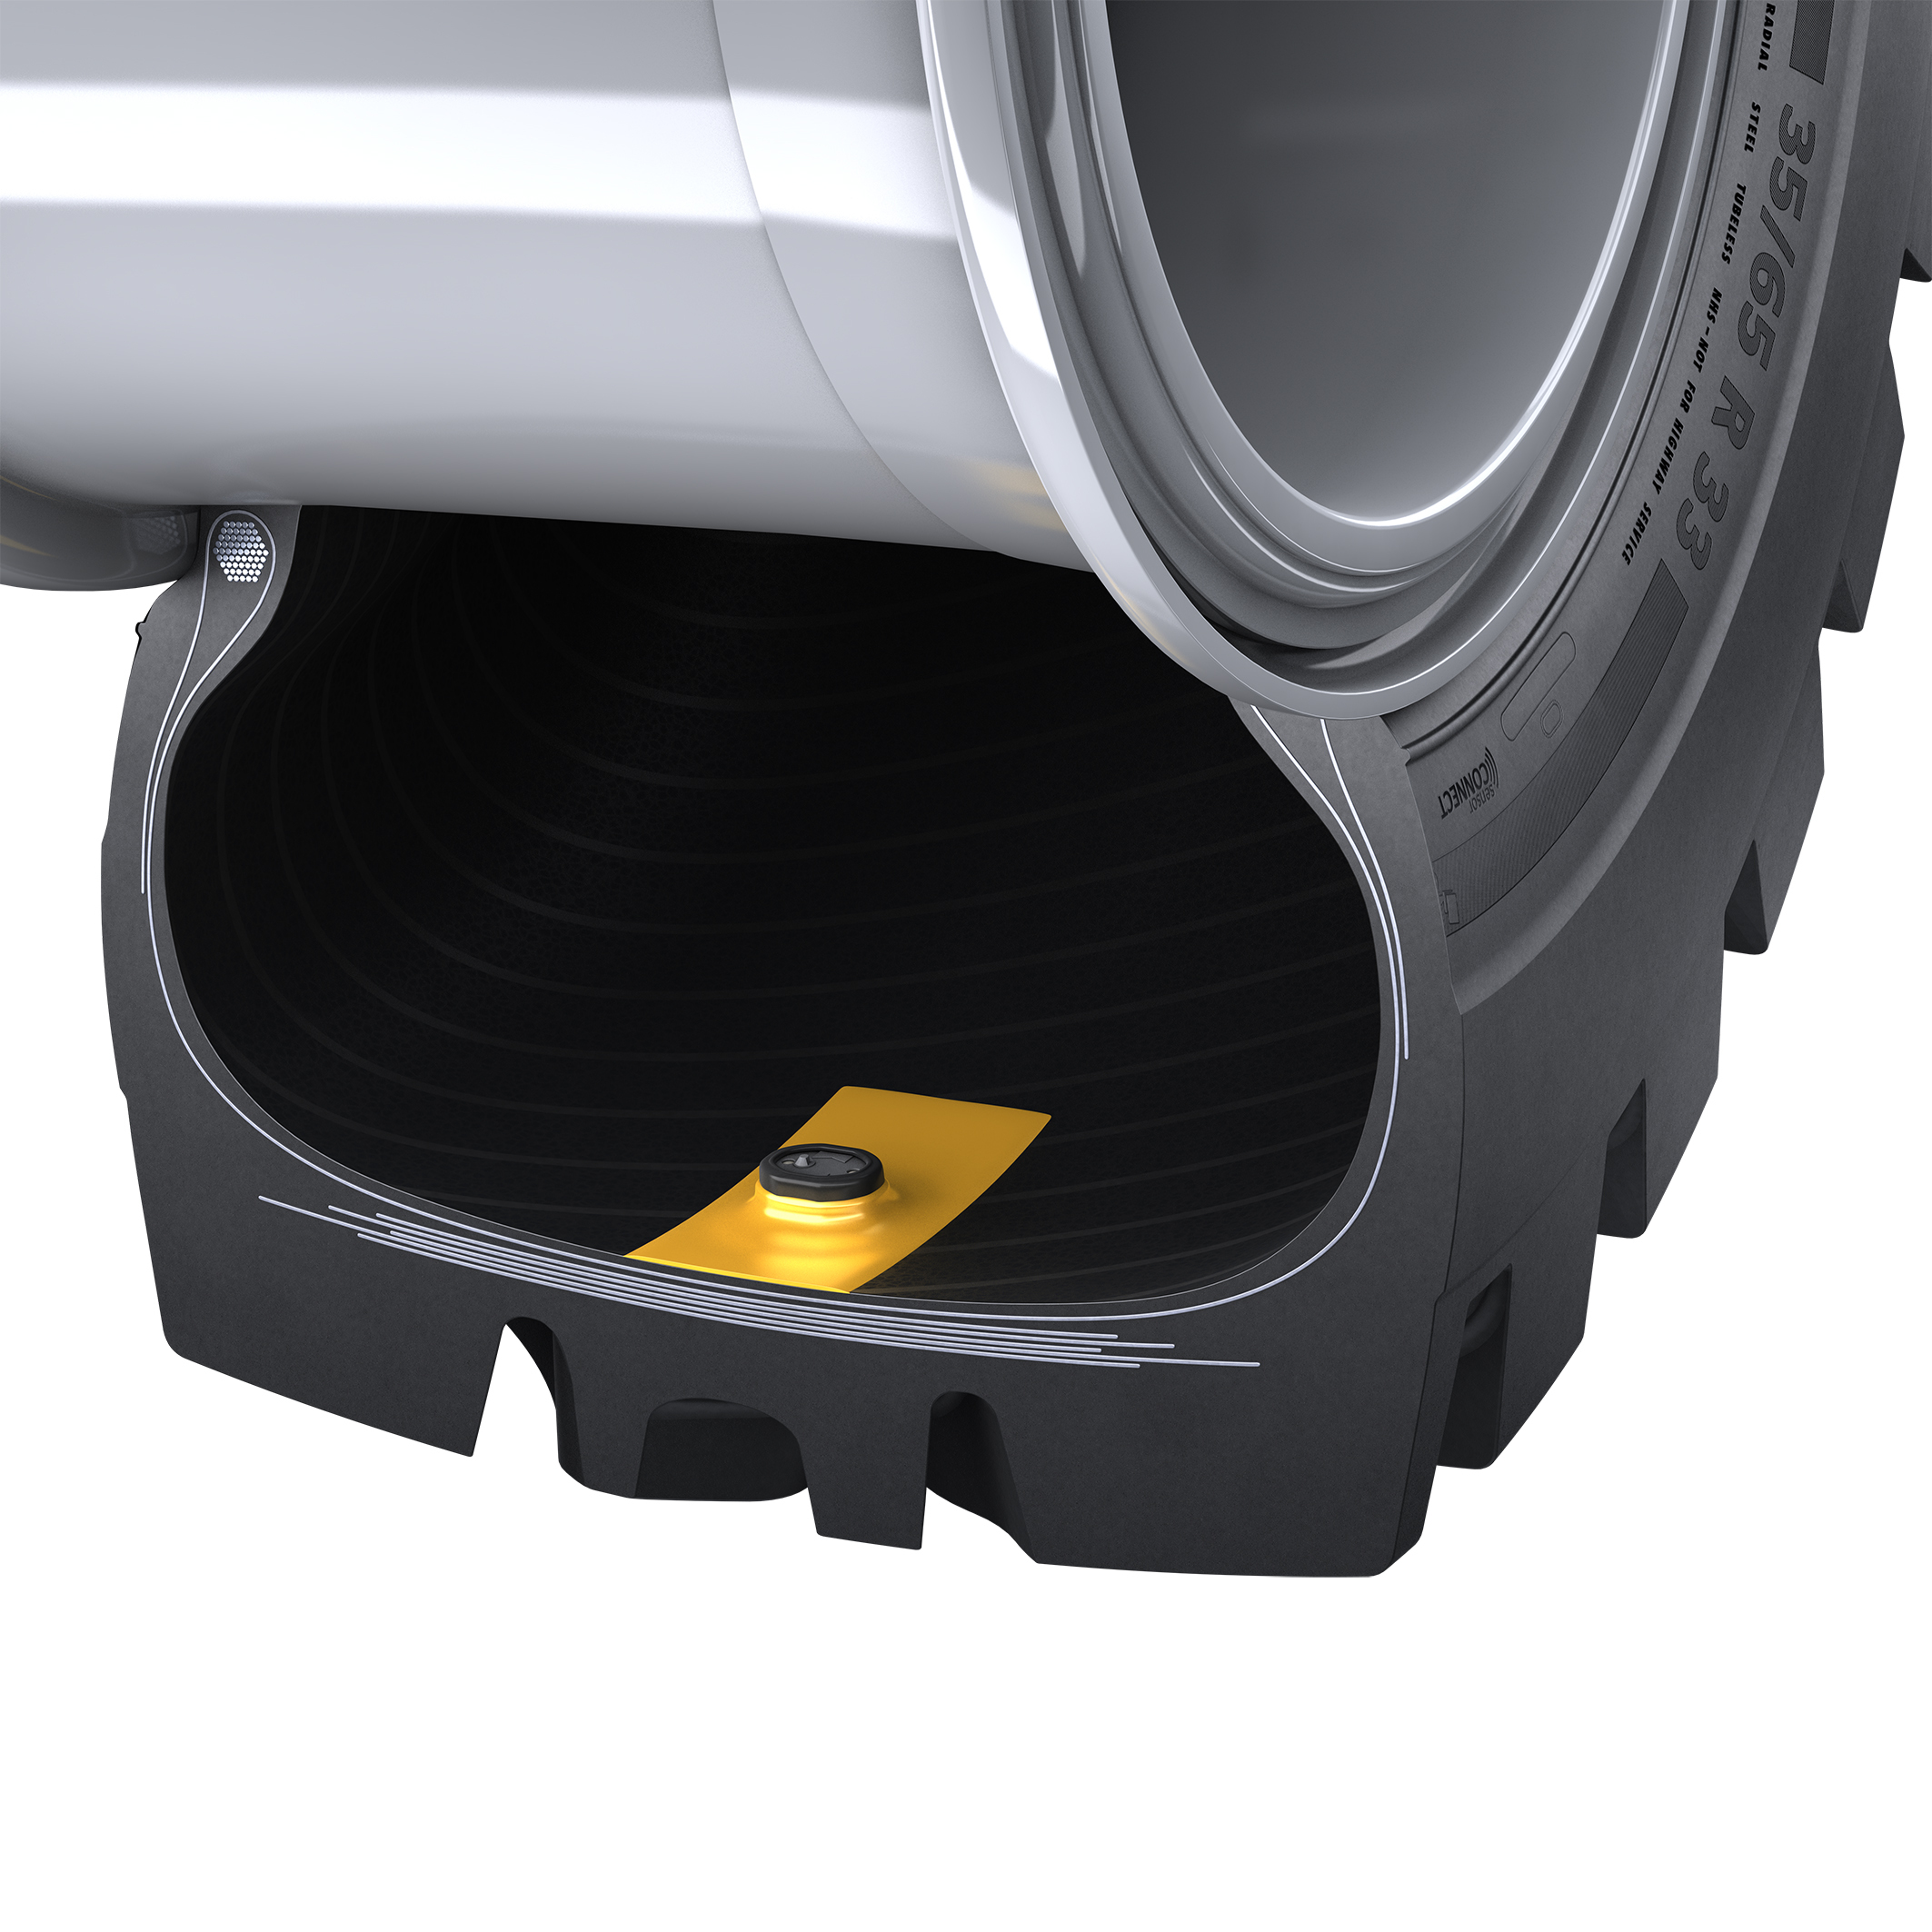 Continental pp ld master traction with sensor